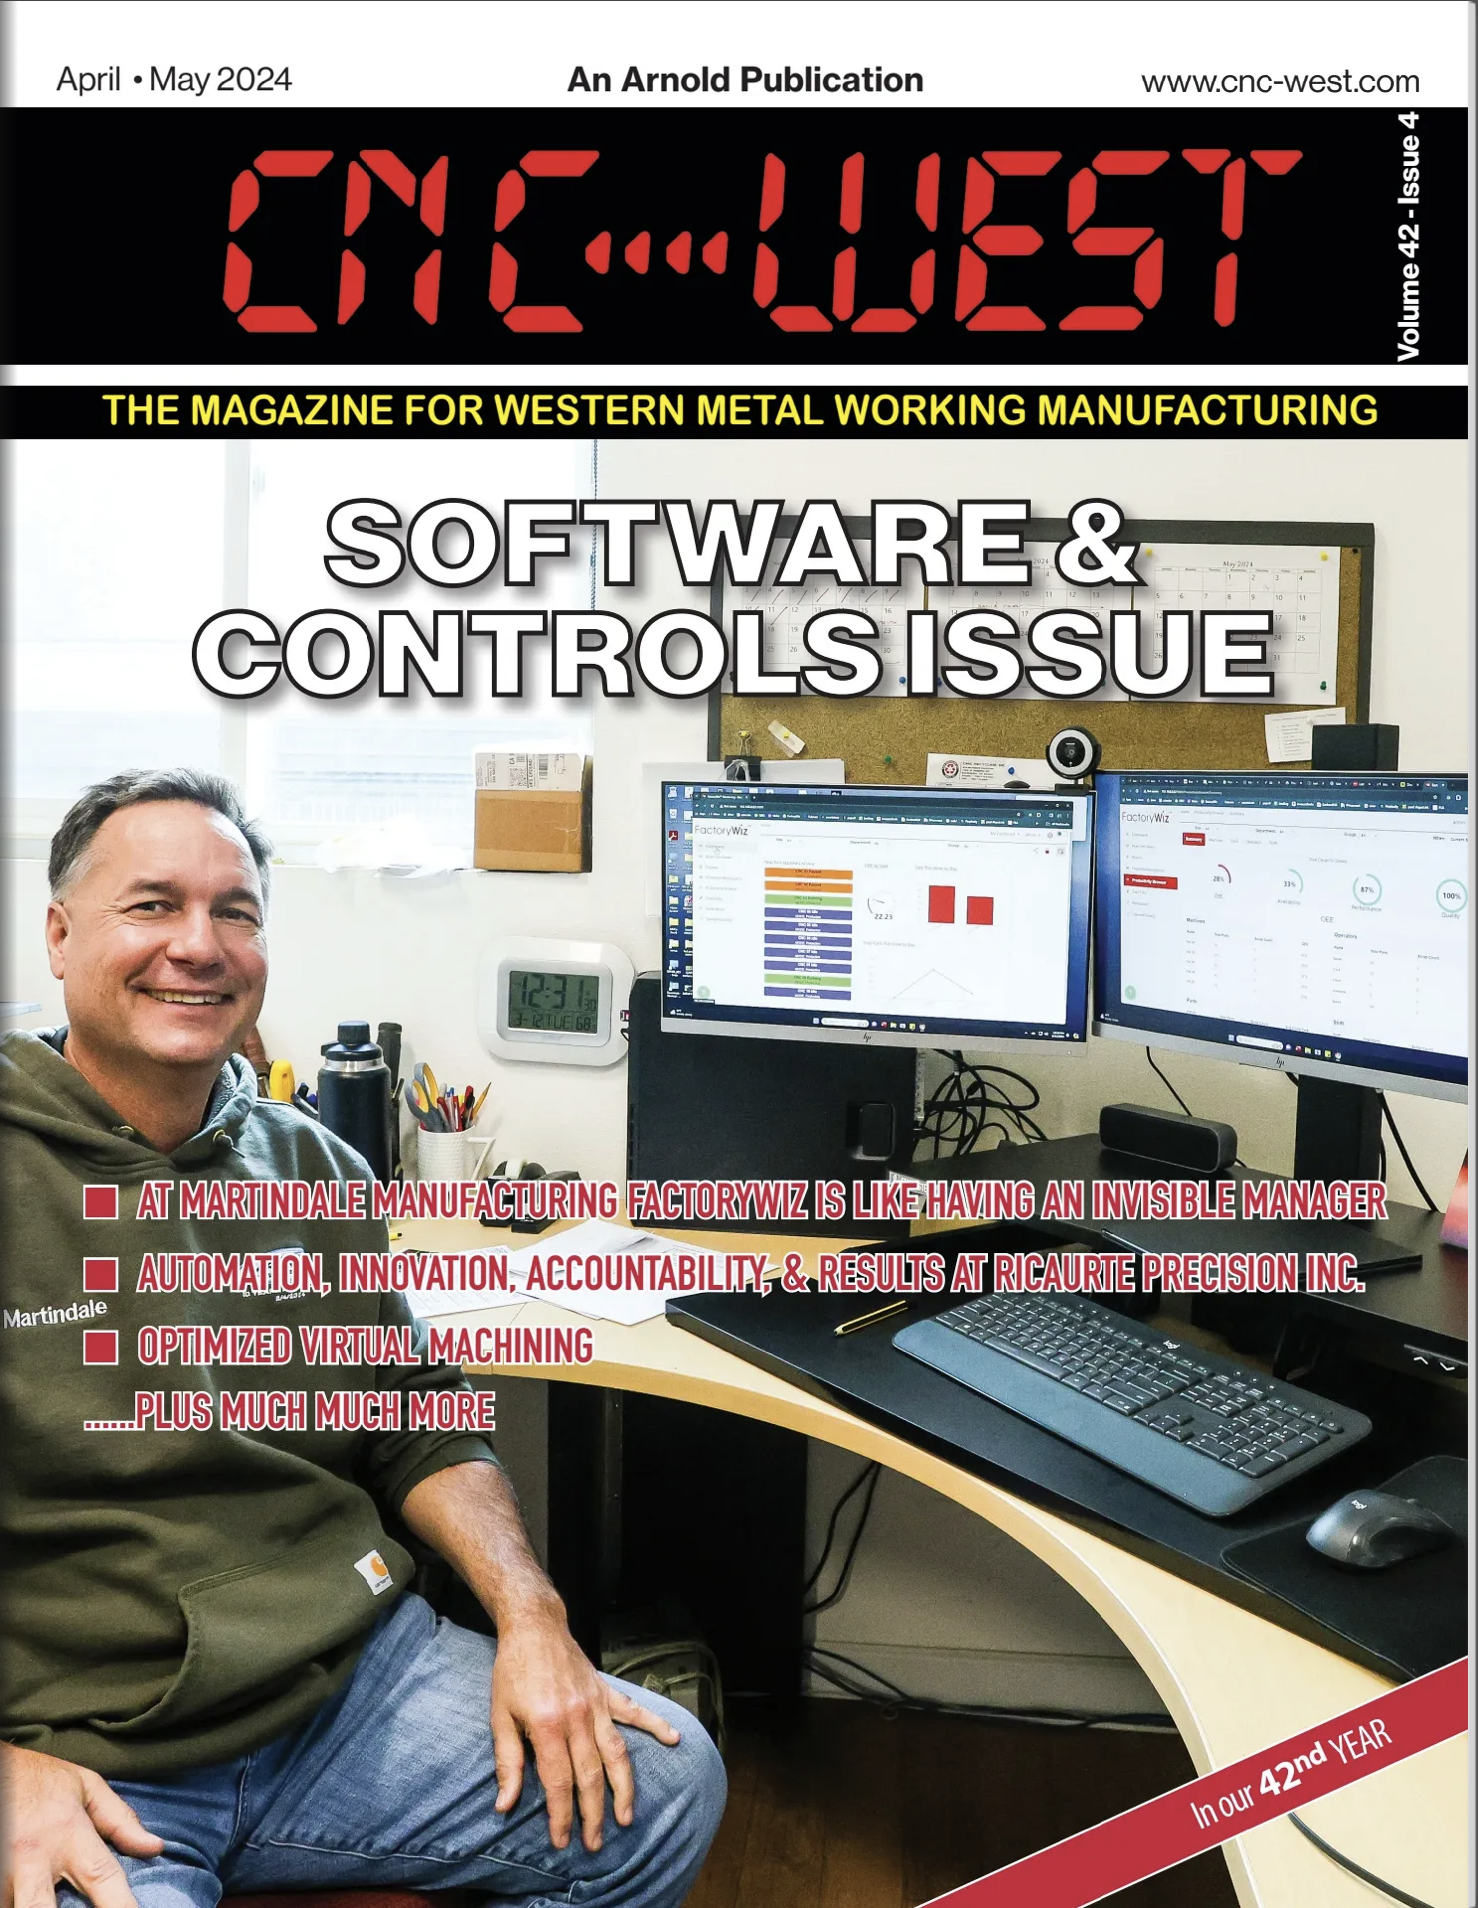 CNC West Magazine Cover April/May 2024 software and controls issue. photo is a guy with computers behind him showing shop management software on screen.